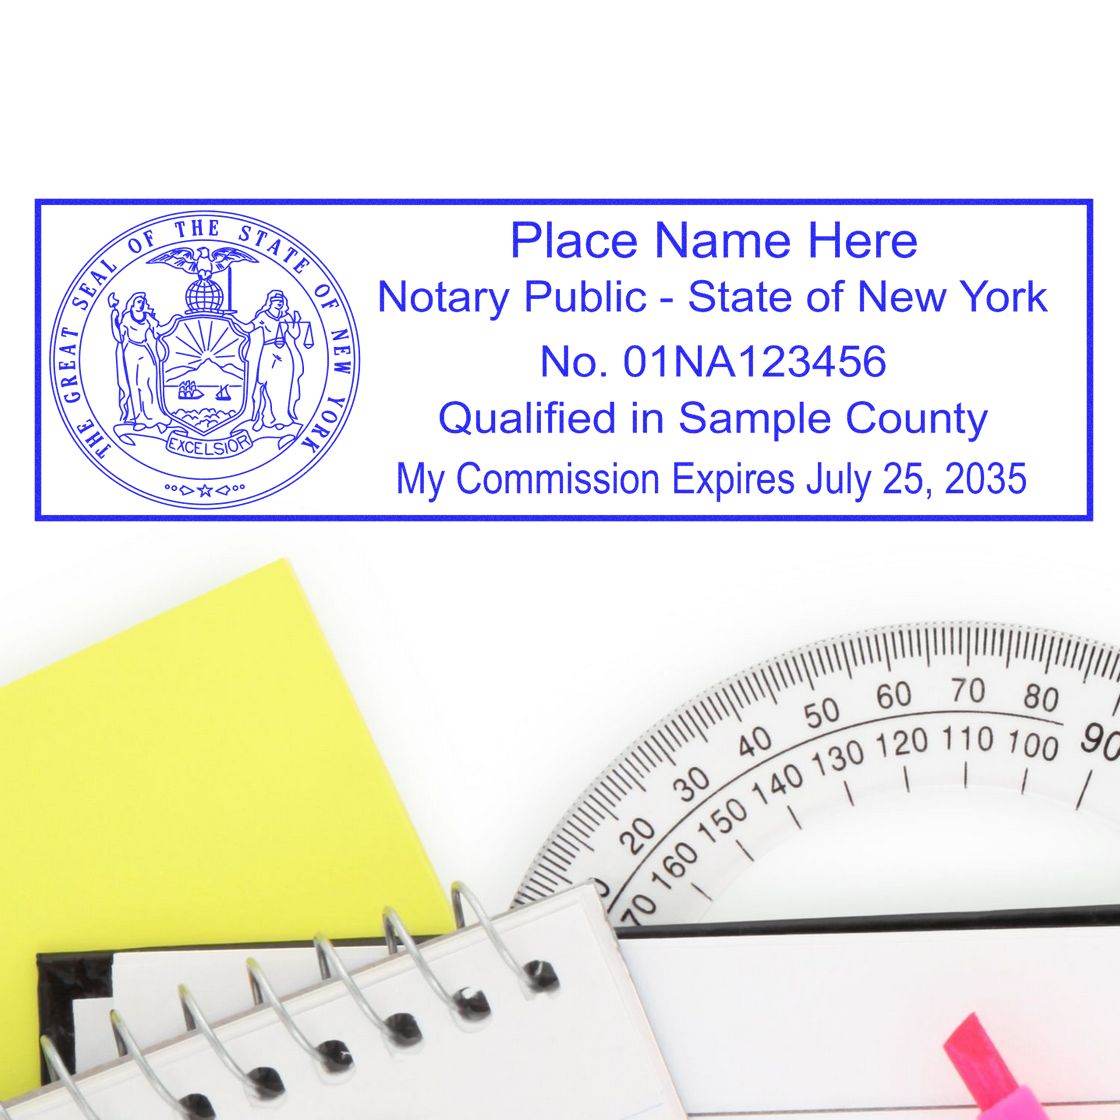 An alternative view of the PSI New York Notary Stamp stamped on a sheet of paper showing the image in use